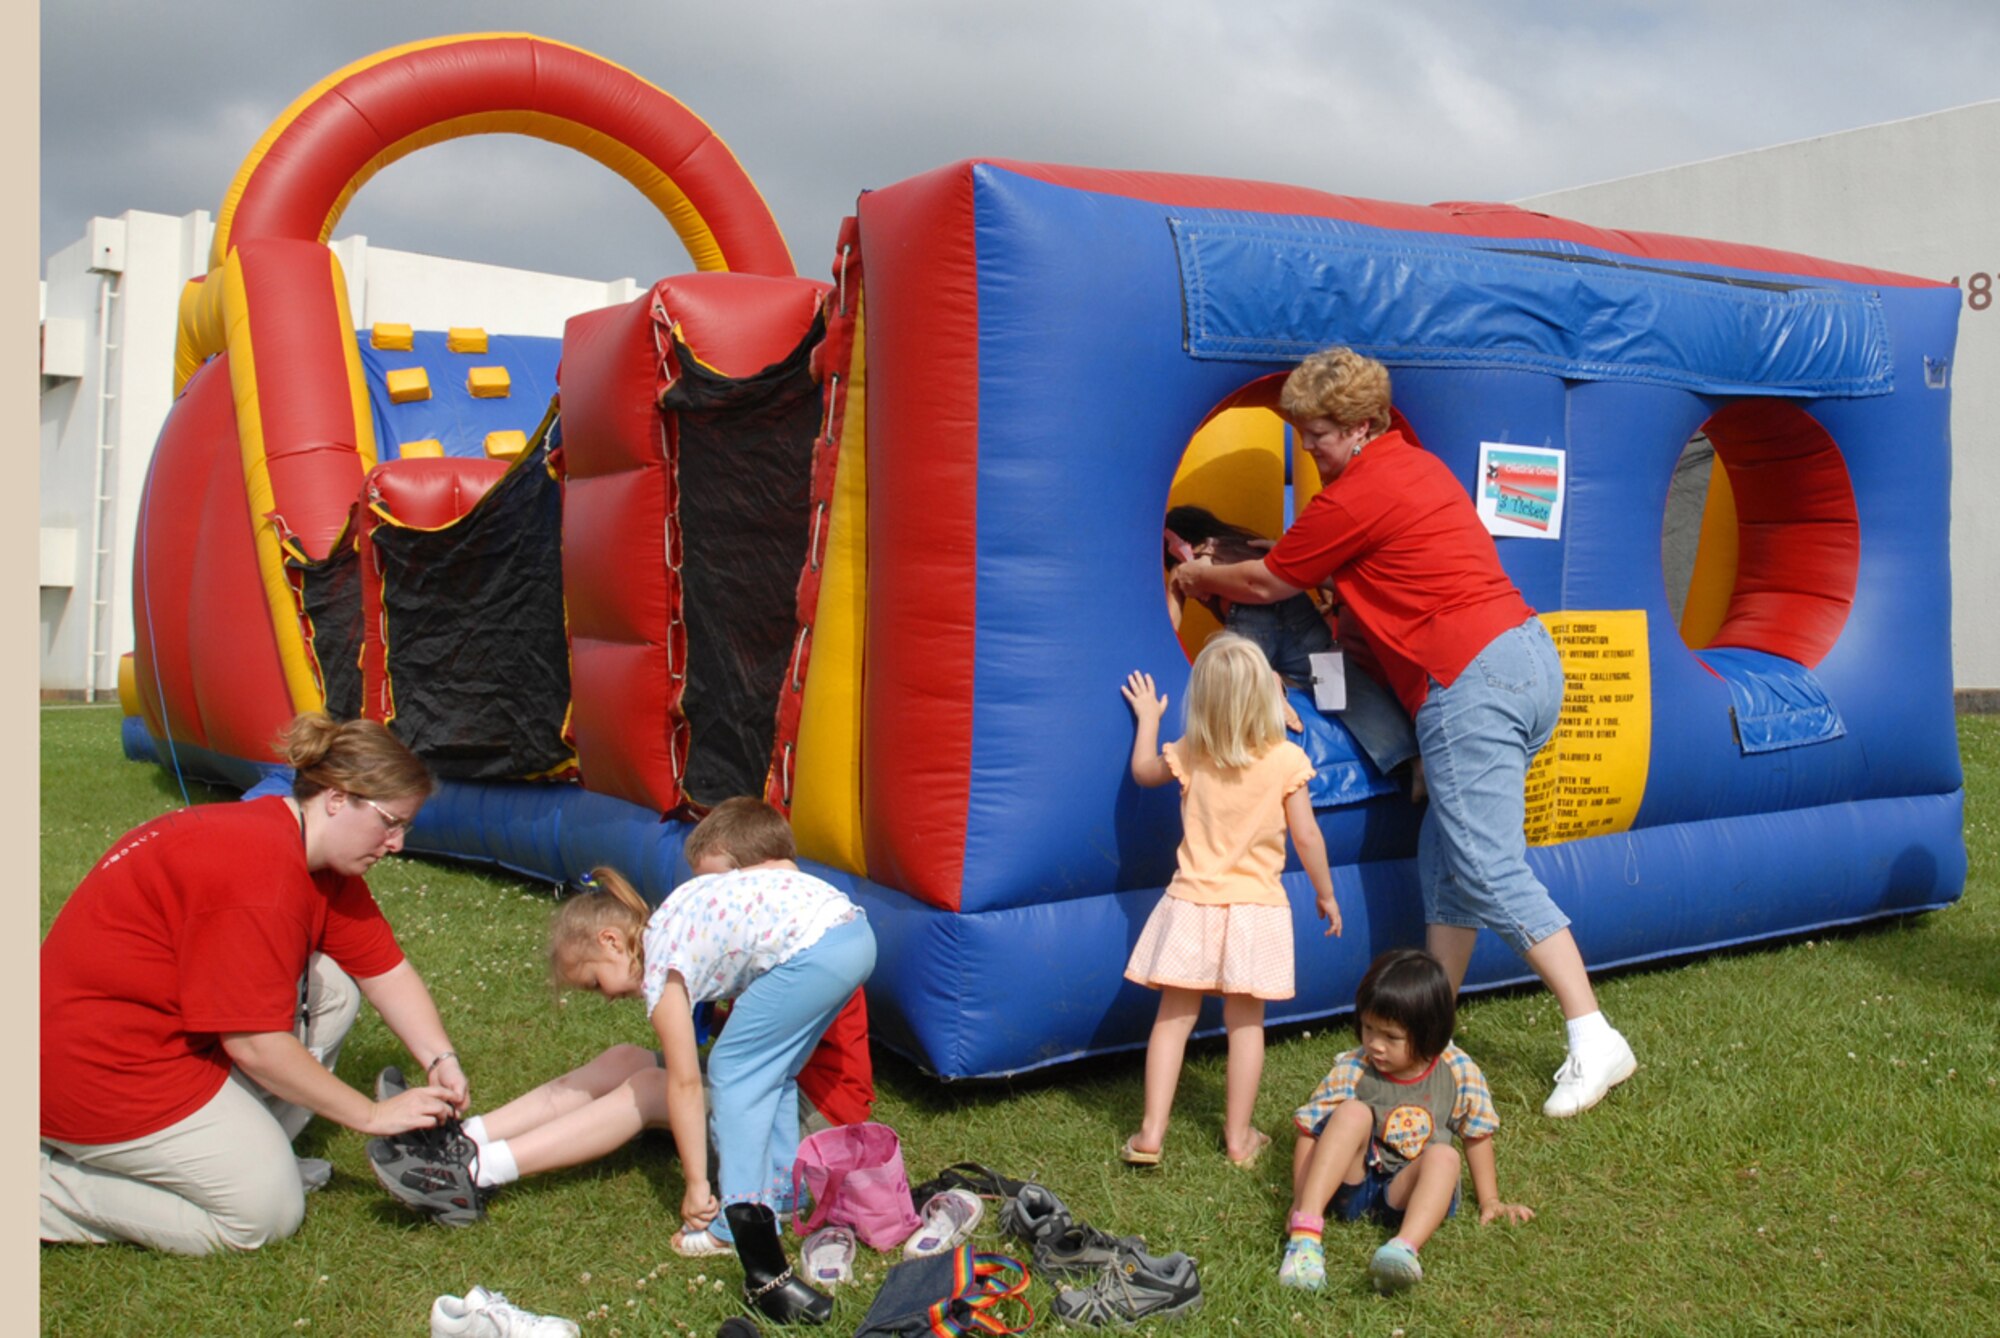 Julianne Miles (right), 1st grade teacher at Bob Hope Elementary School, helps some children into an inflatable obstacle course during the Bob Hope Elementary School end of the year carnival May 24 at Kadena Air Base, Japan.
(U.S. Air Force/Airman 1st Class Kasey Zickmund)